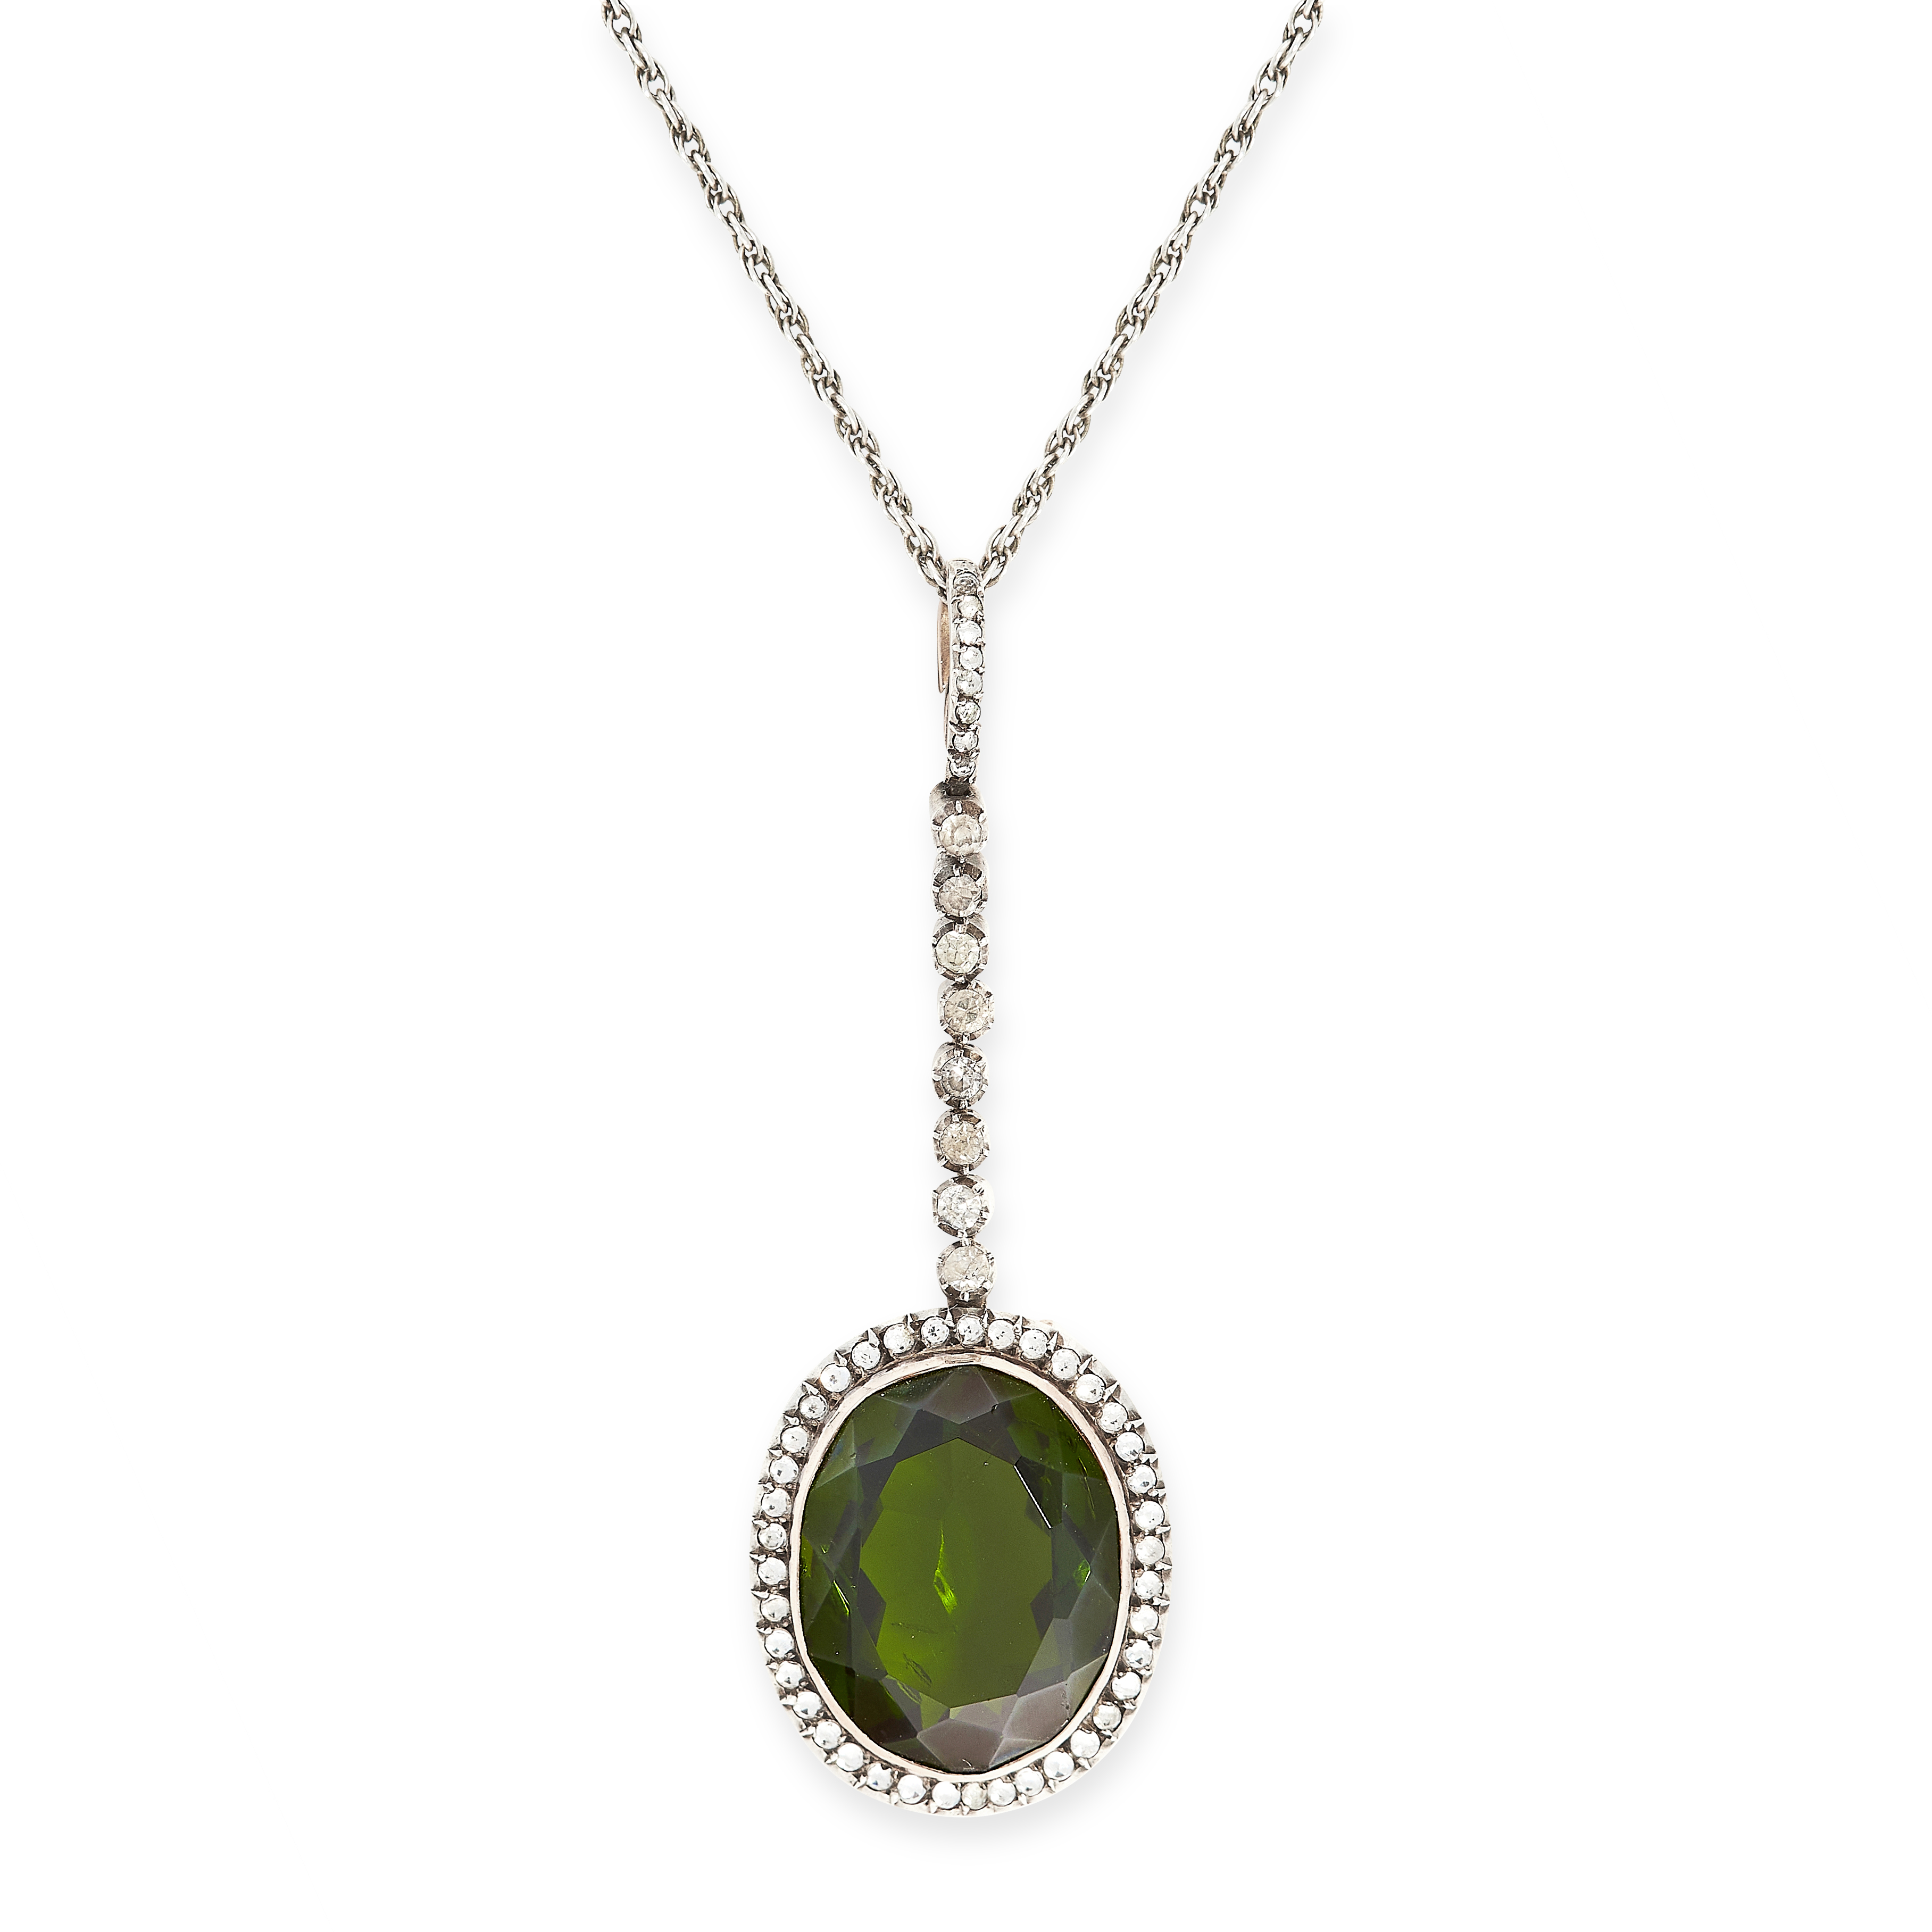 A GREEN PASTE PENDANT AND CHAIN, EARLY 20TH CENTURY the pendant rubover set with an oval cut green